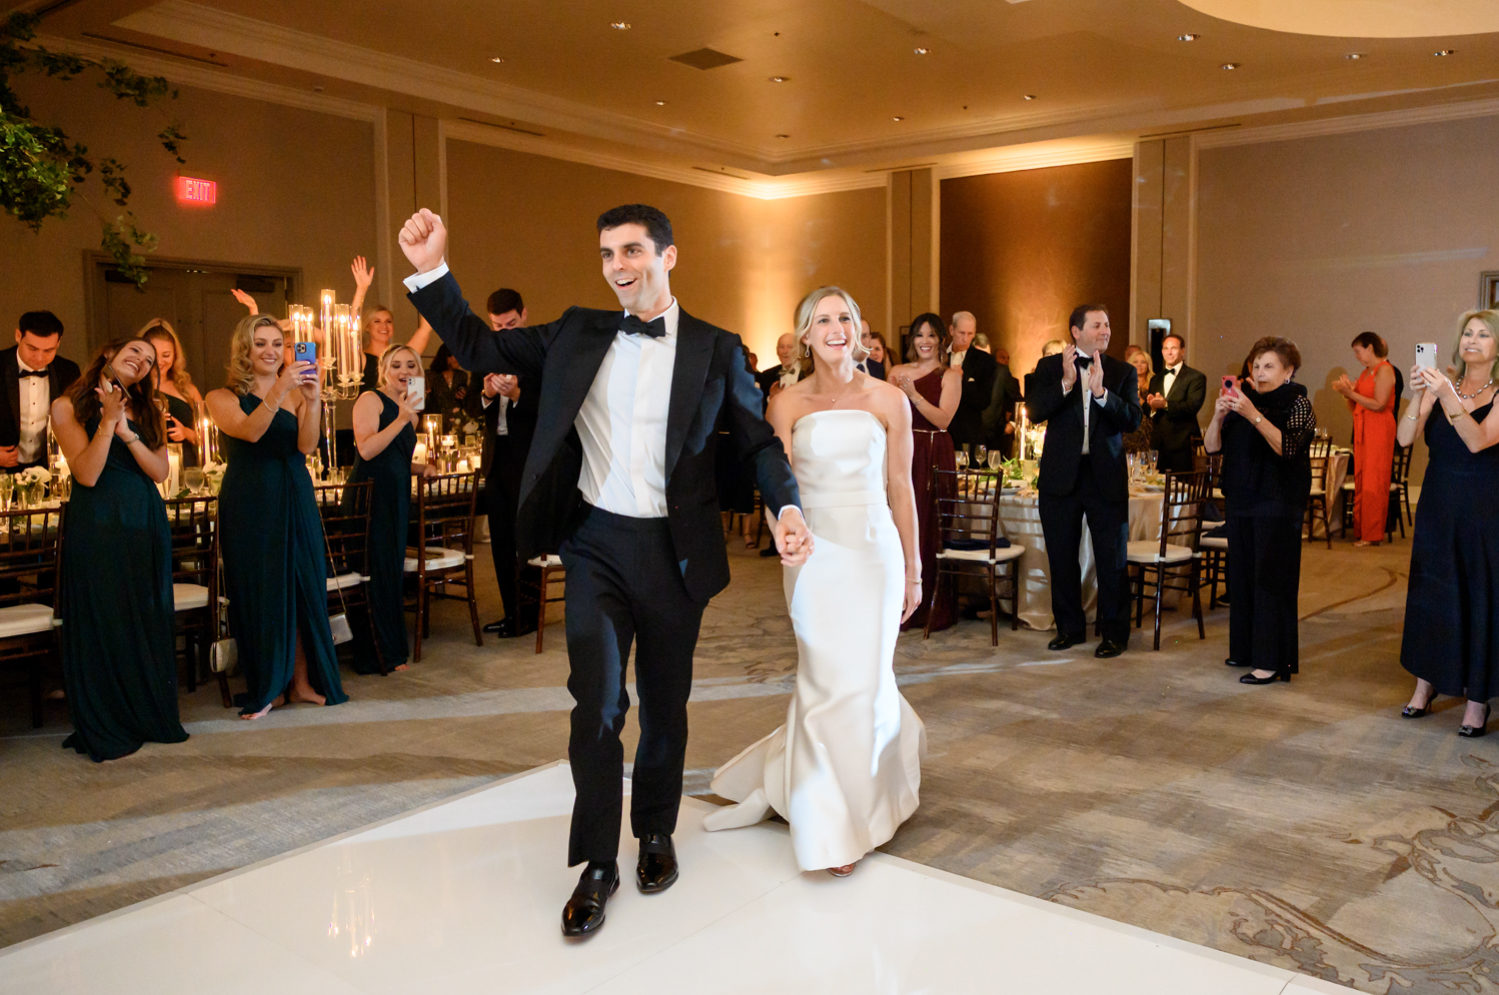 The bride and groom enter the reception as the guests applaud. The groom pumps his fist in the air.